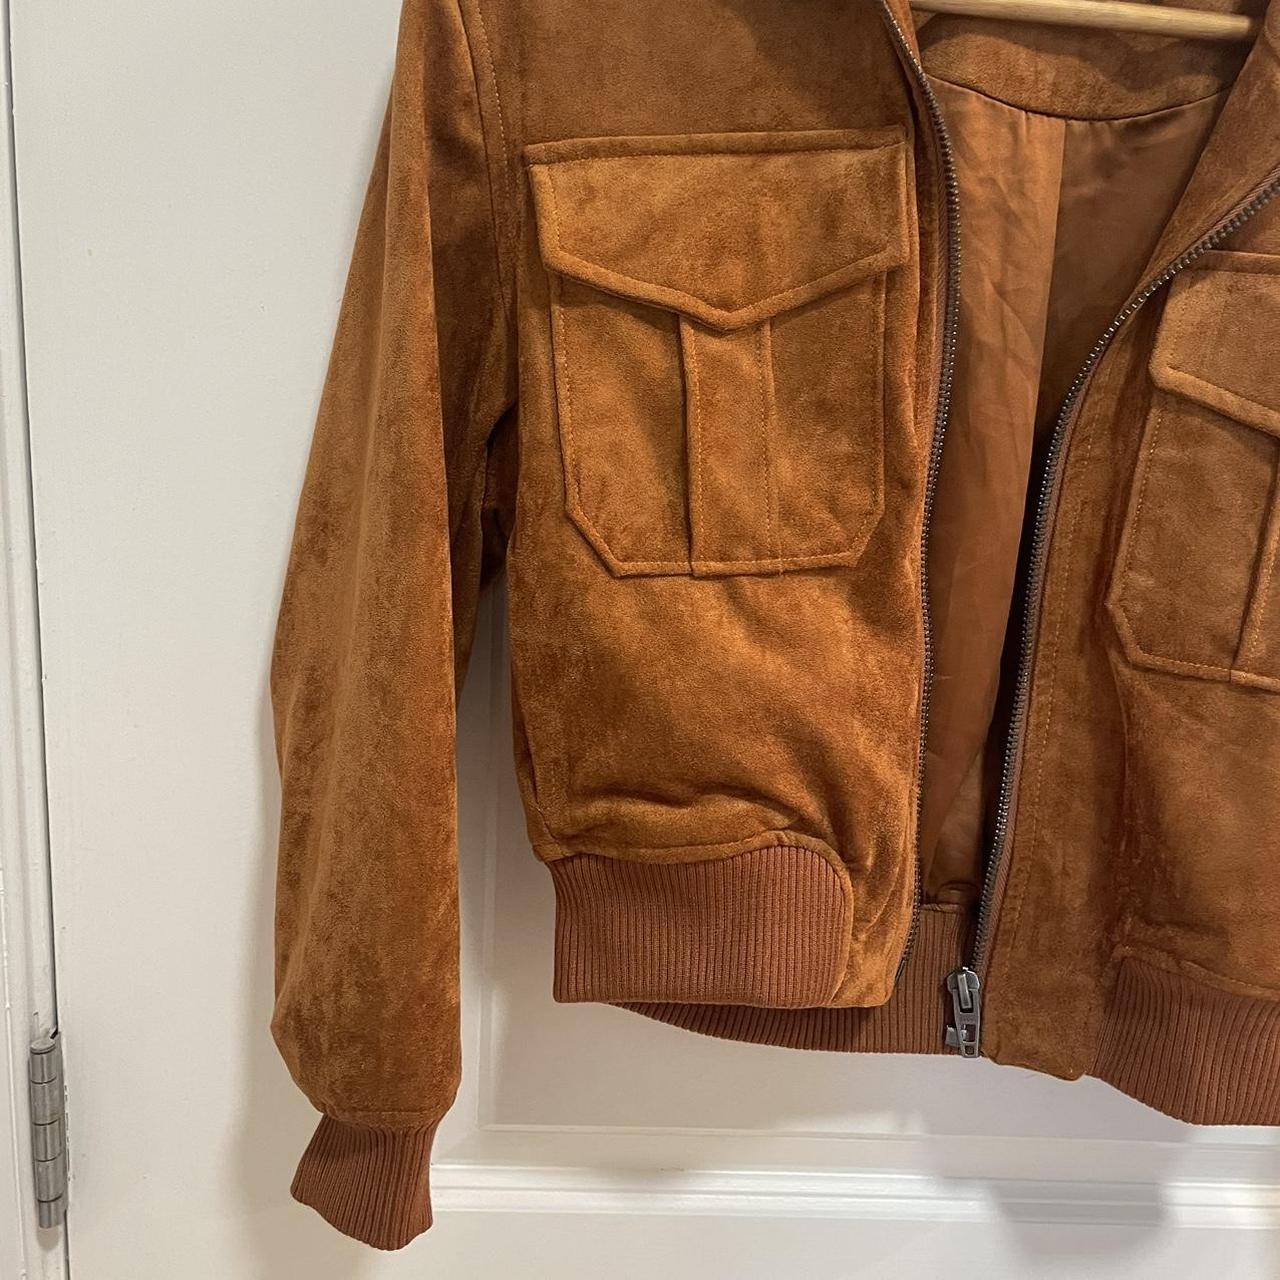 Blank NYC Women's Tan and Brown Jacket (5)